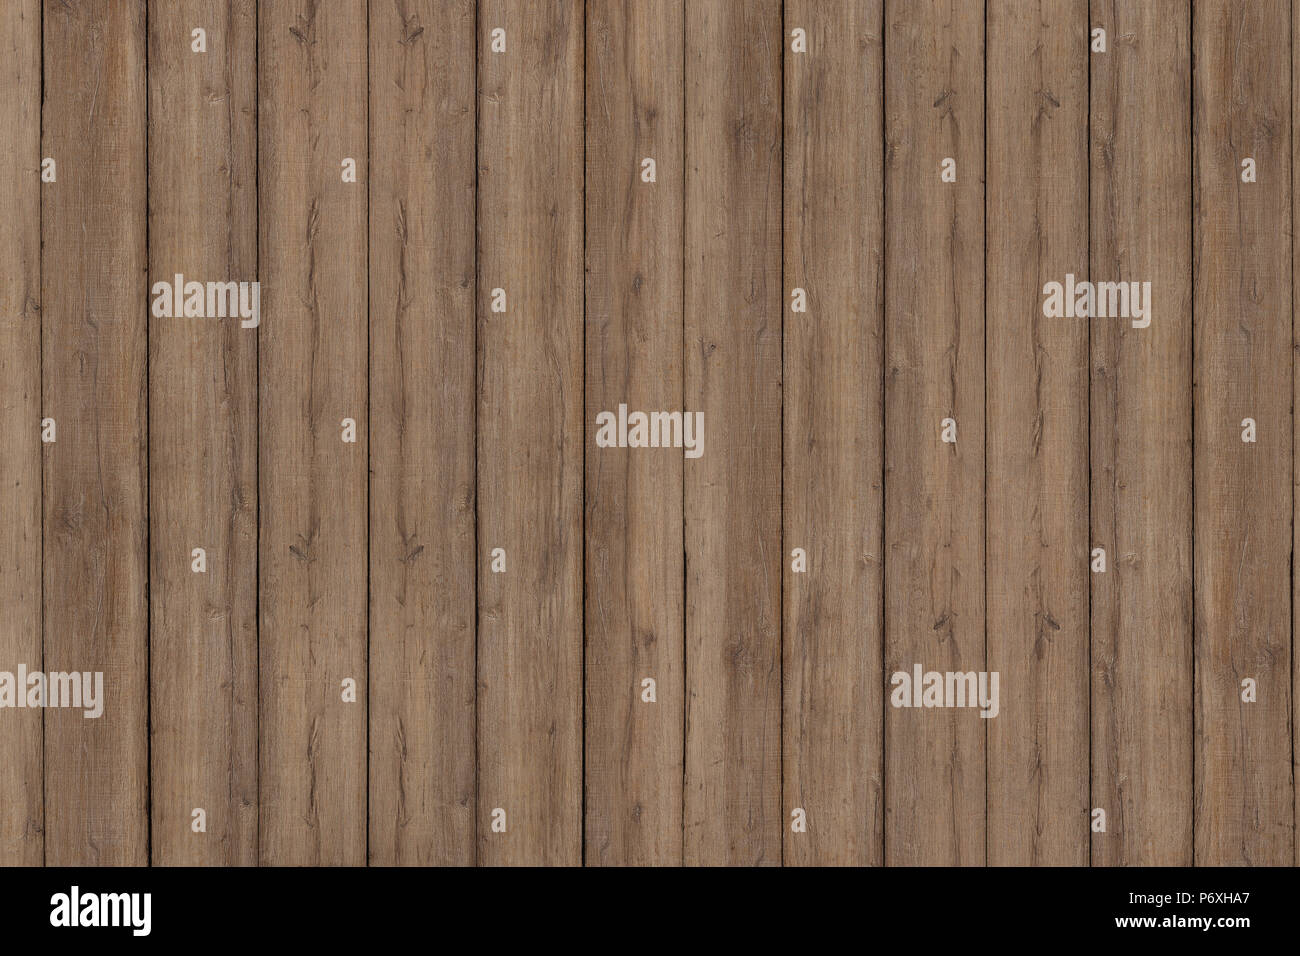 grunge wood panels, wooden texture background wall Stock Photo